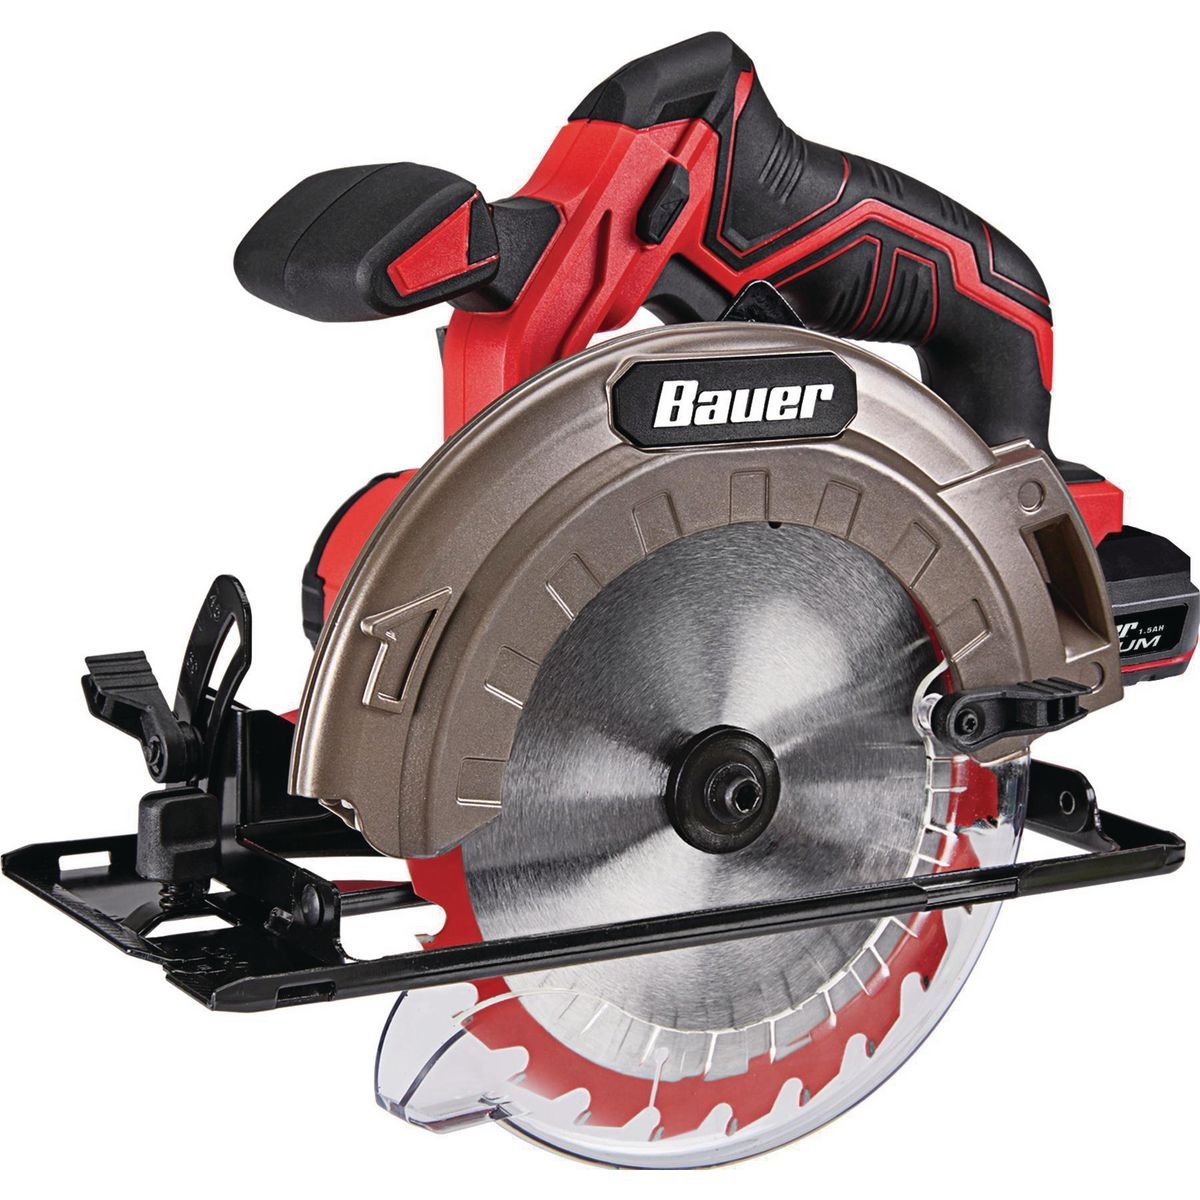 BAUER 20V Cordless 6-1/2 in. Circular Saw - Tool Only